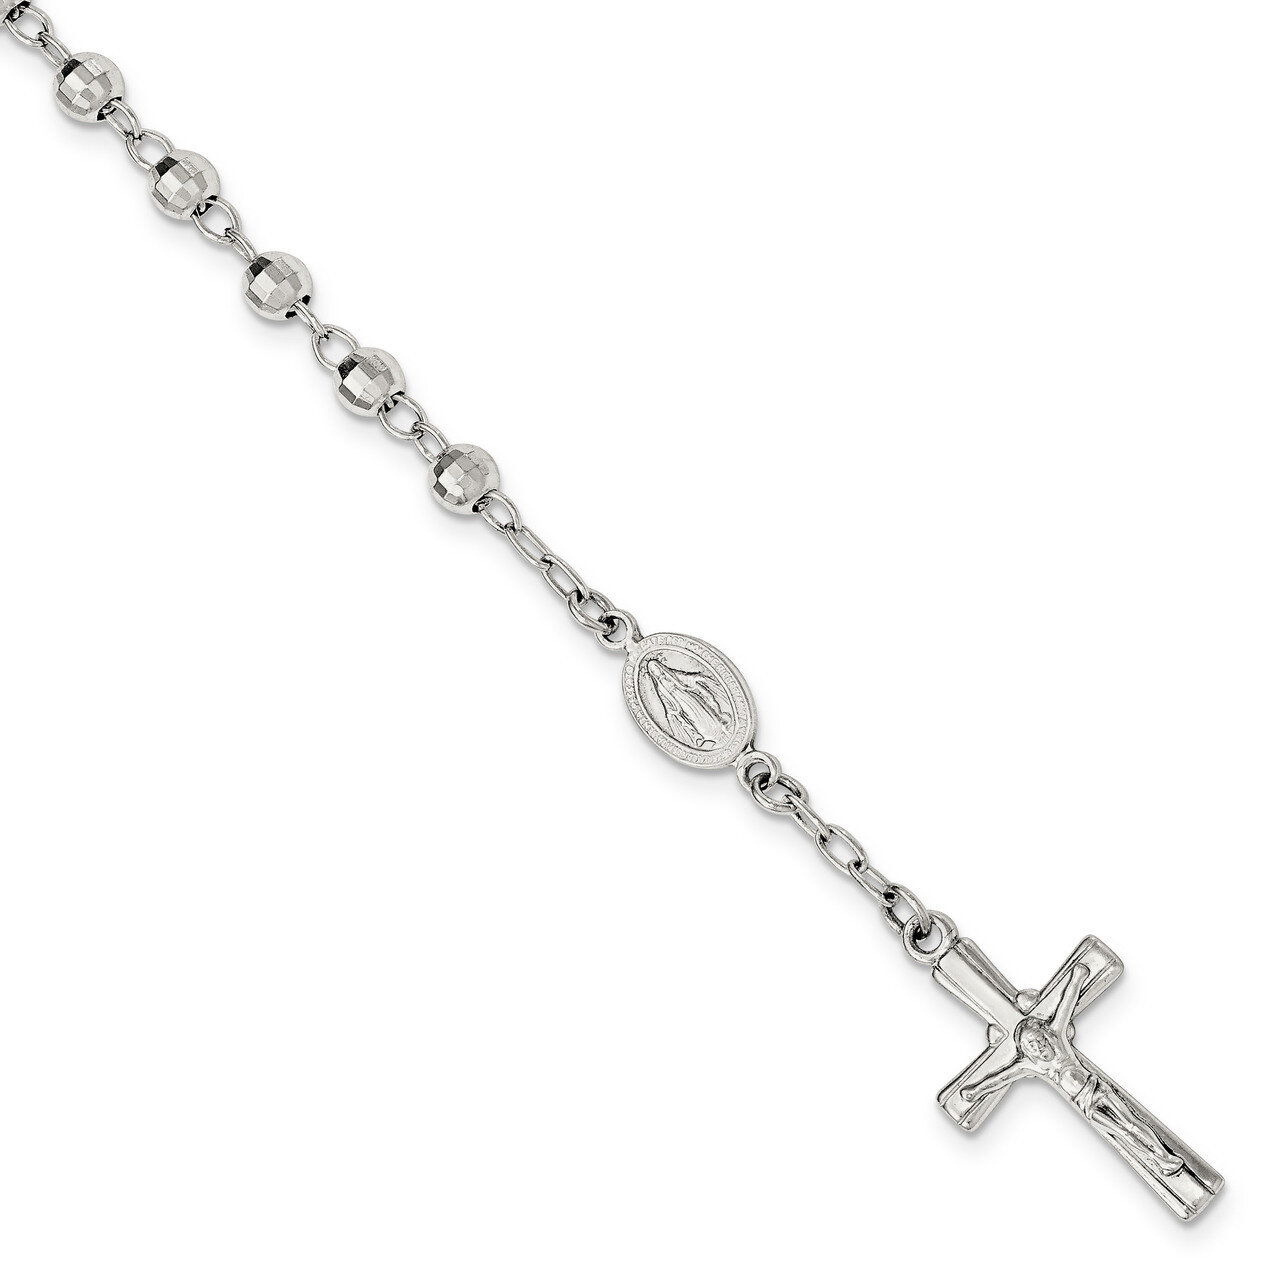 Rosary Bracelet 7.5 Inch Sterling Silver Polished QH5140-7.5